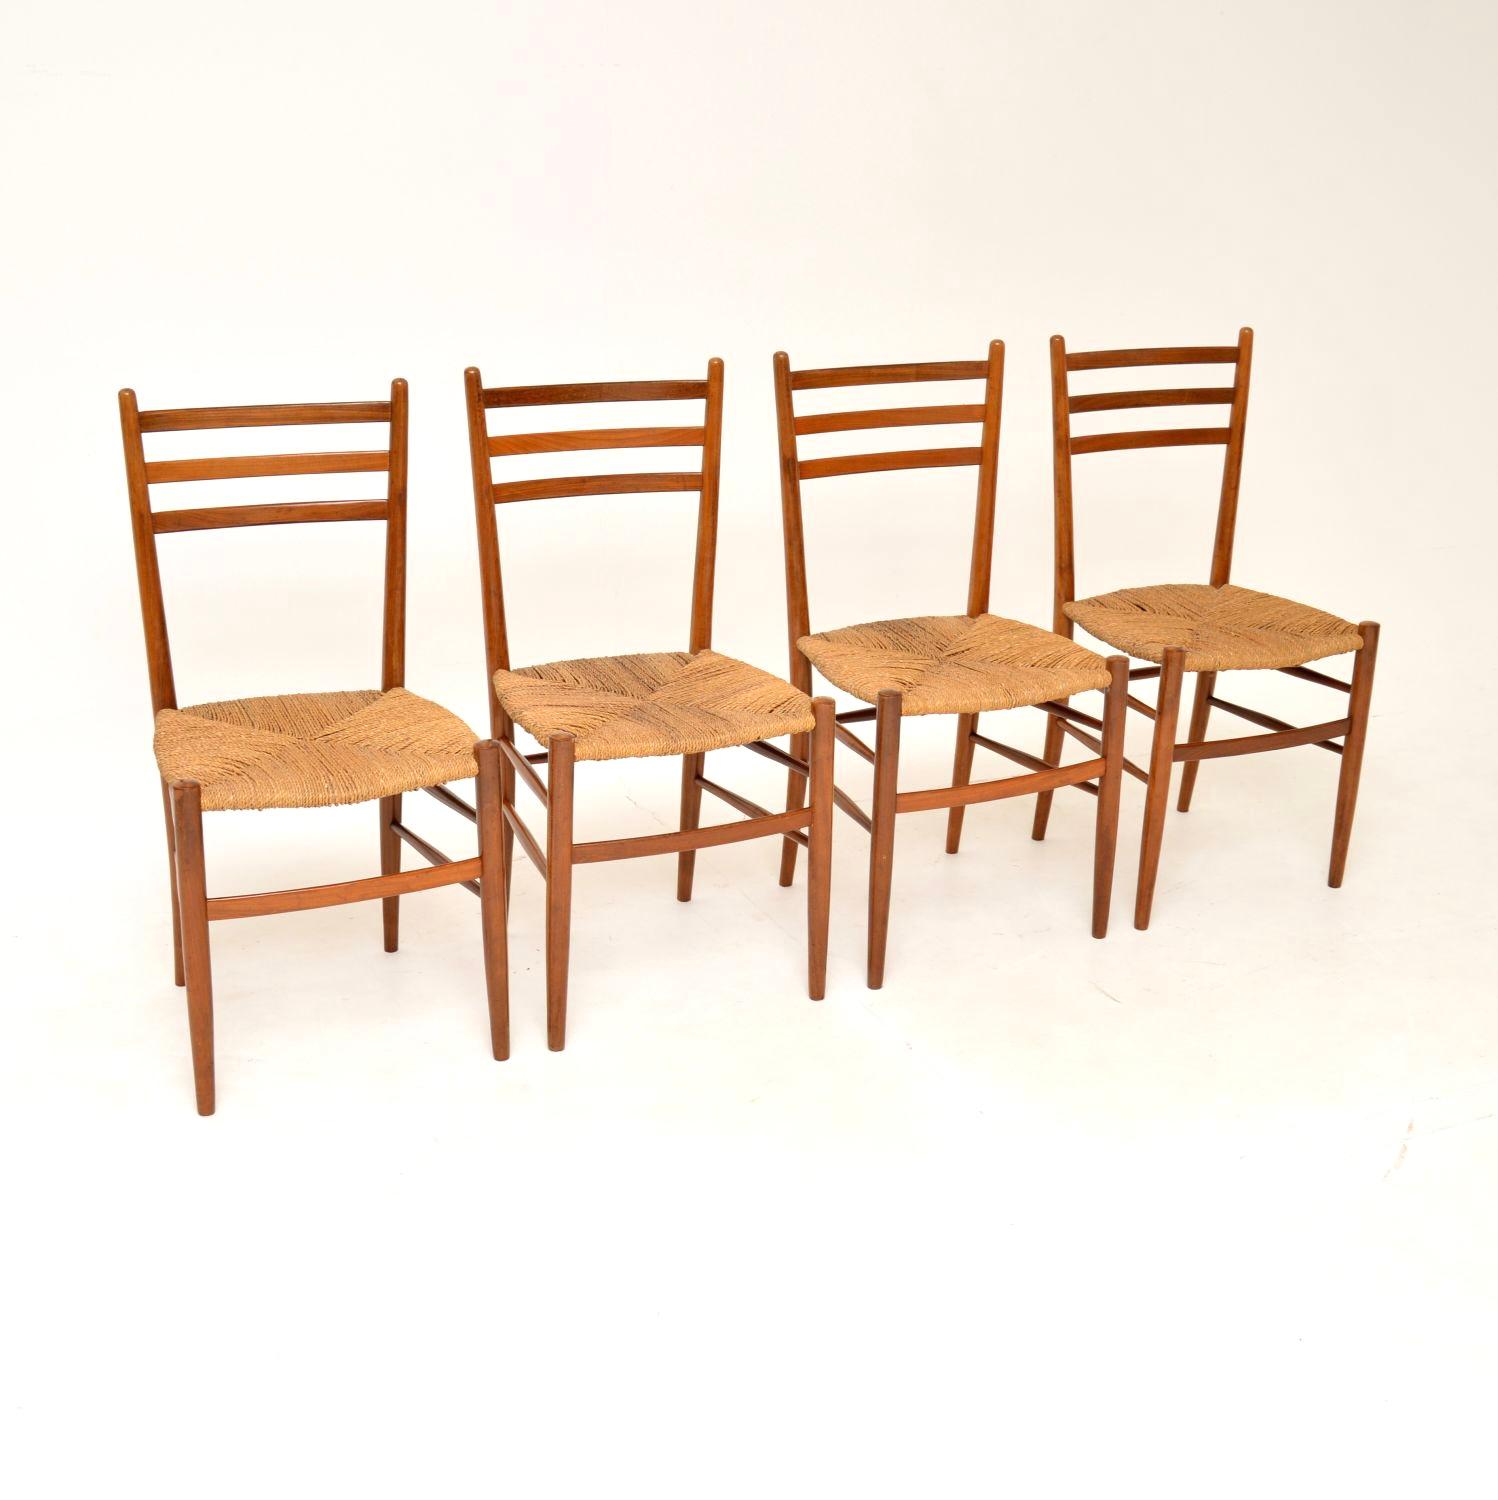 A beautiful and elegant set of four vintage Italian dining chairs in solid walnut. They were made in Italy around the 1960-70’s.

The quality is excellent, they are very well made and stylish. The ladder backs have three horizontal rails, they